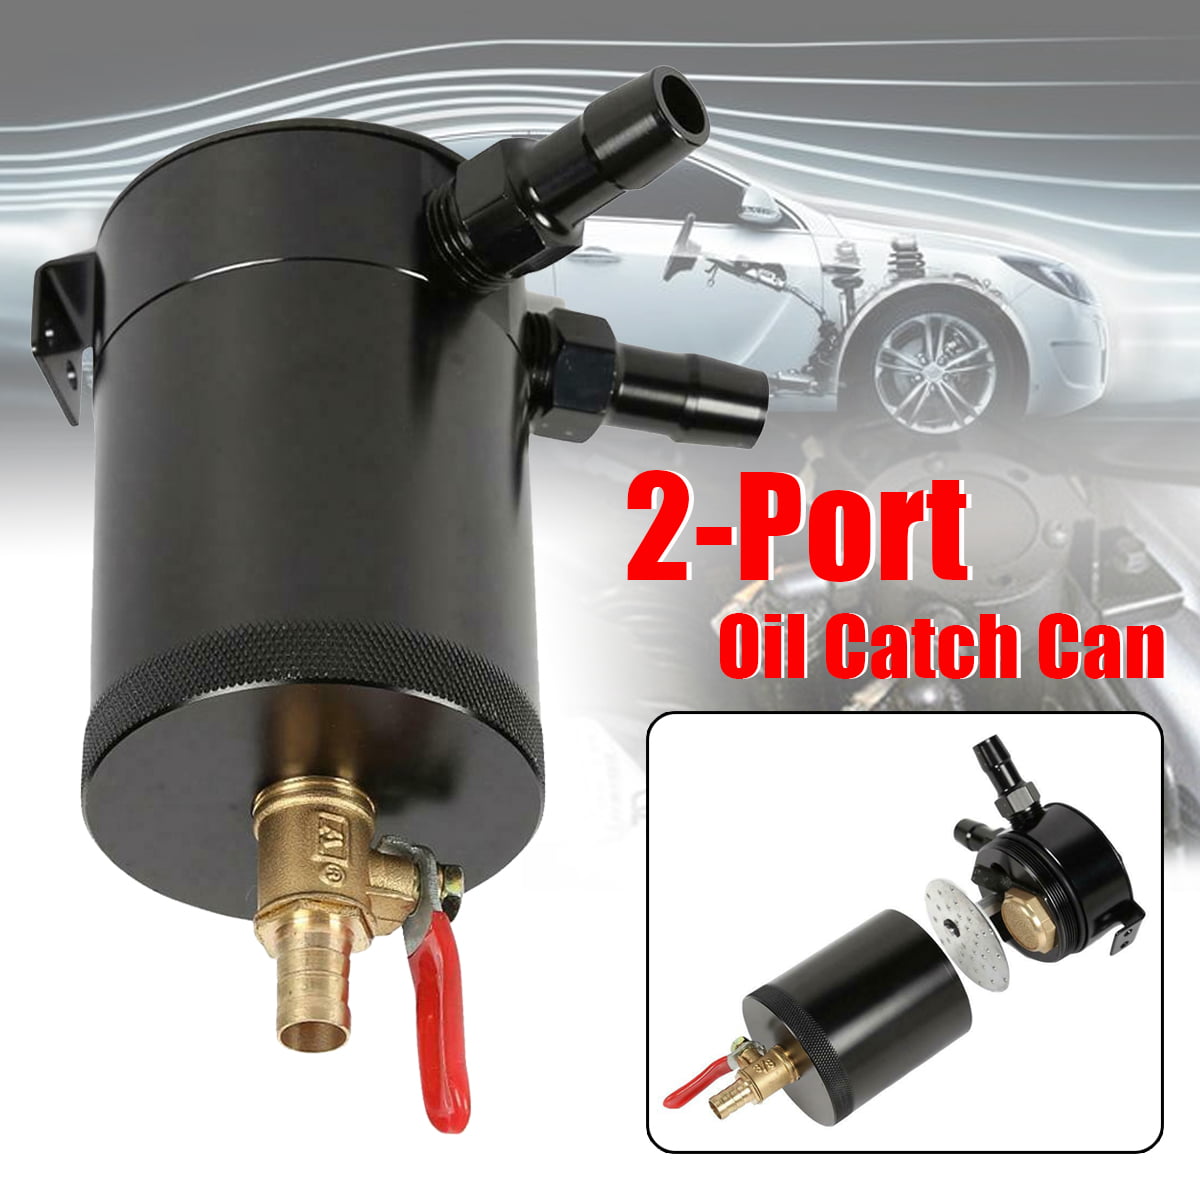 Car Truck Engine Oil Catch with Breather Compacto Baffled 2 Port Oil Catch Can Tank Baffled Oil Catch Can